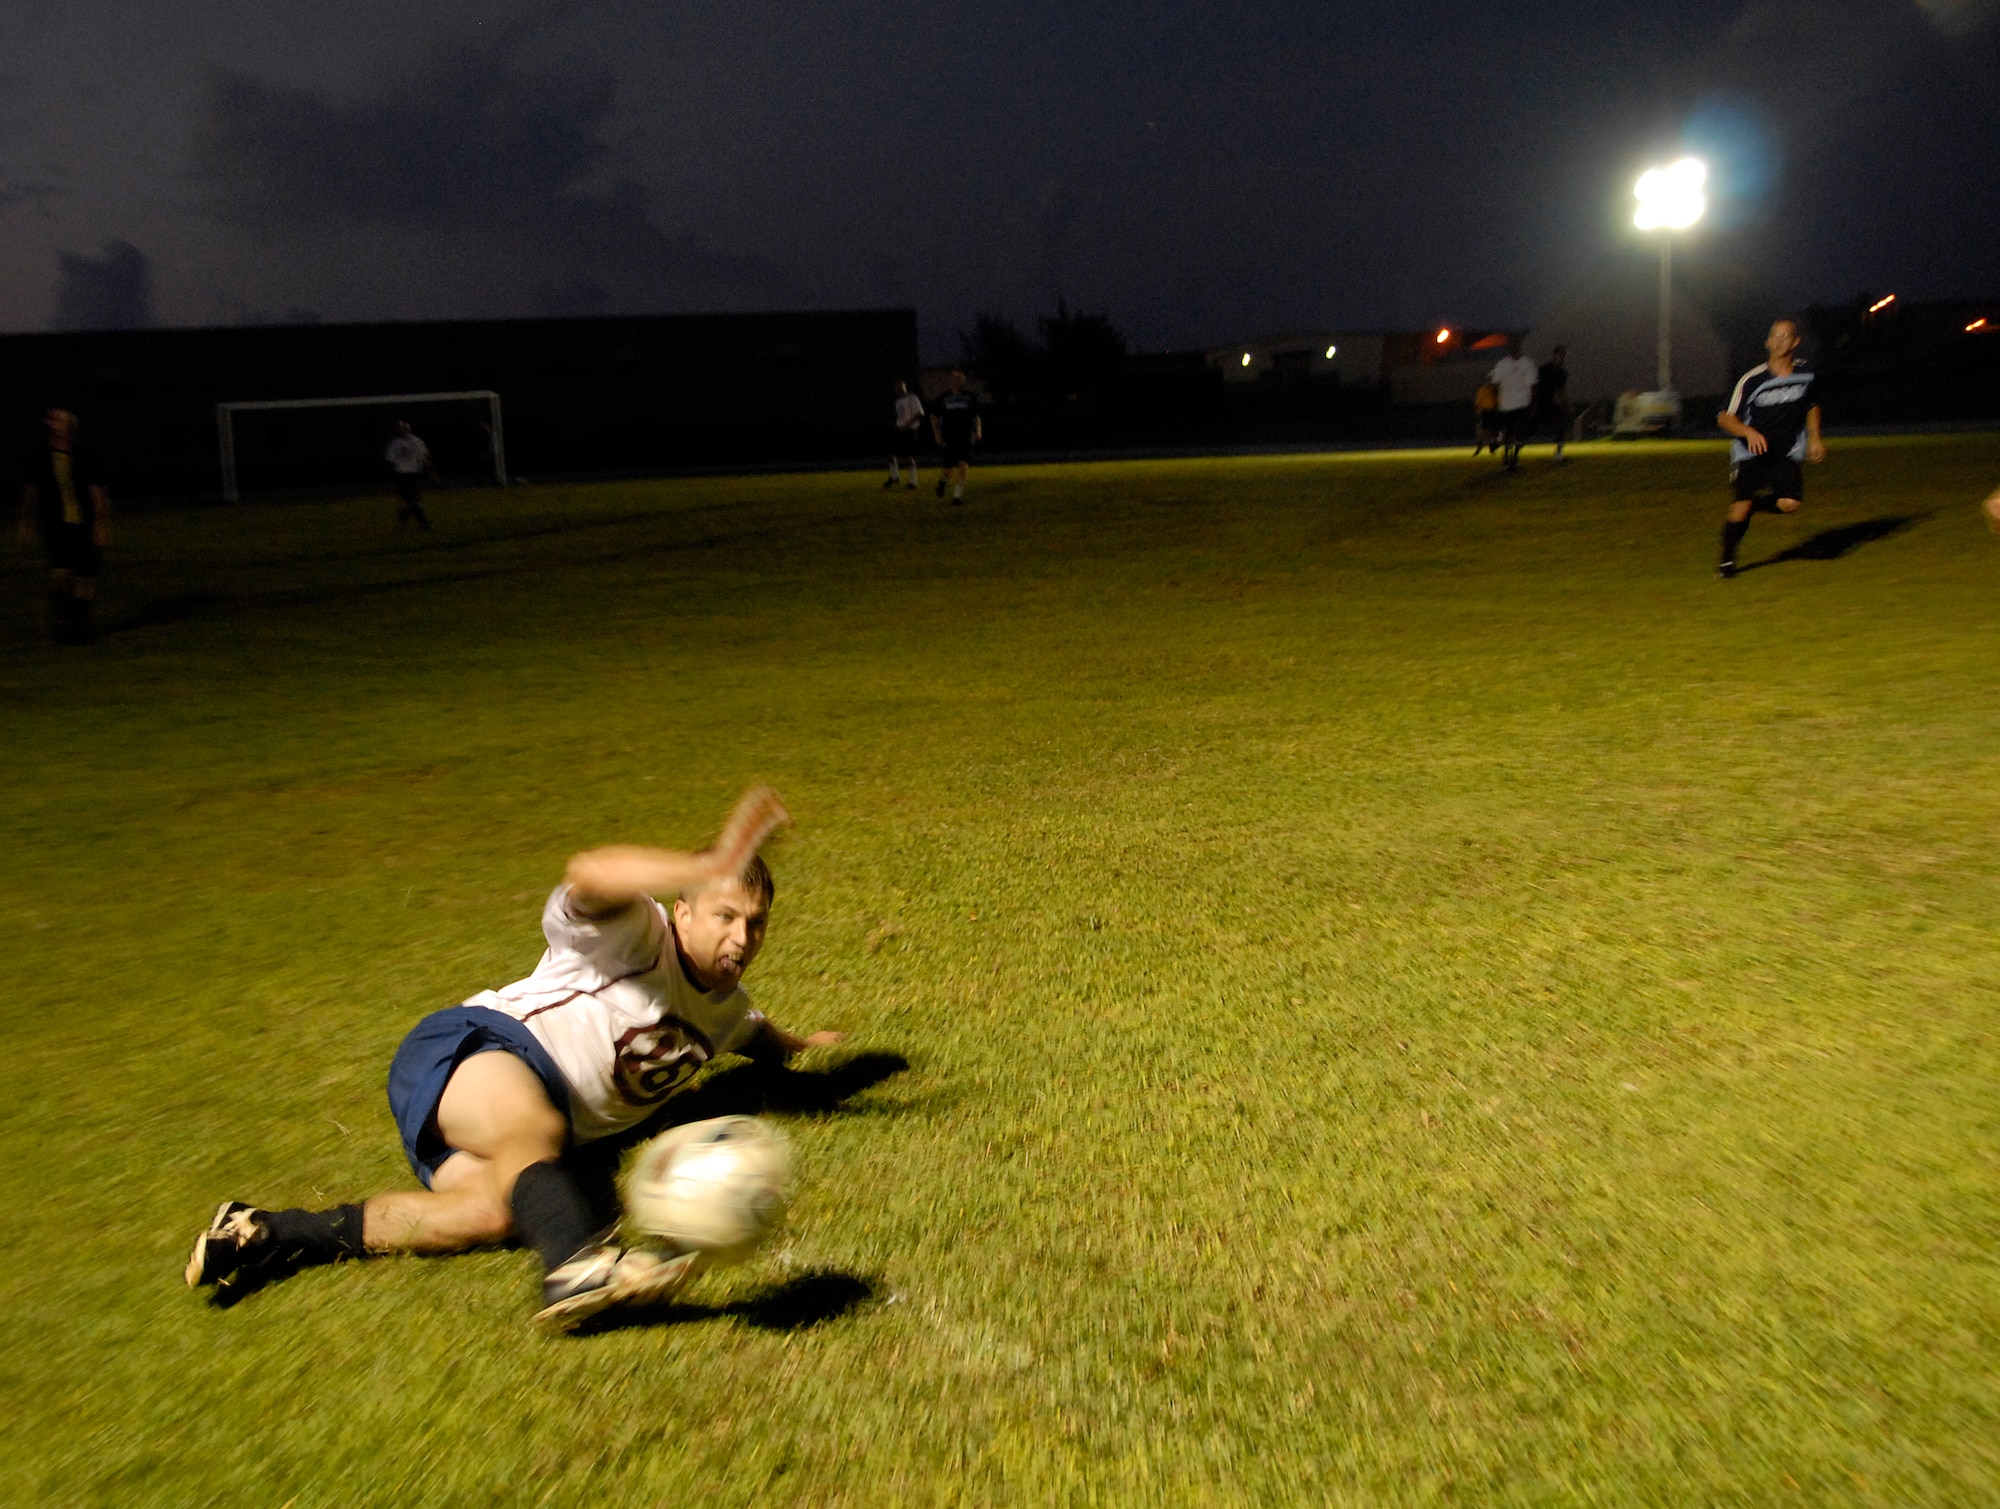 ANDERSEN AIR FORCE BASE, Guam - A Helicopter Sea Combat Squadron TWENTY-FIVE player continues the action by keeping the ball inbound Aug. 28 during intramural soccer bat Andersen's soccer field. (Photo by Airman 1st Class Daniel Owen/36th Wing Public Affairs)